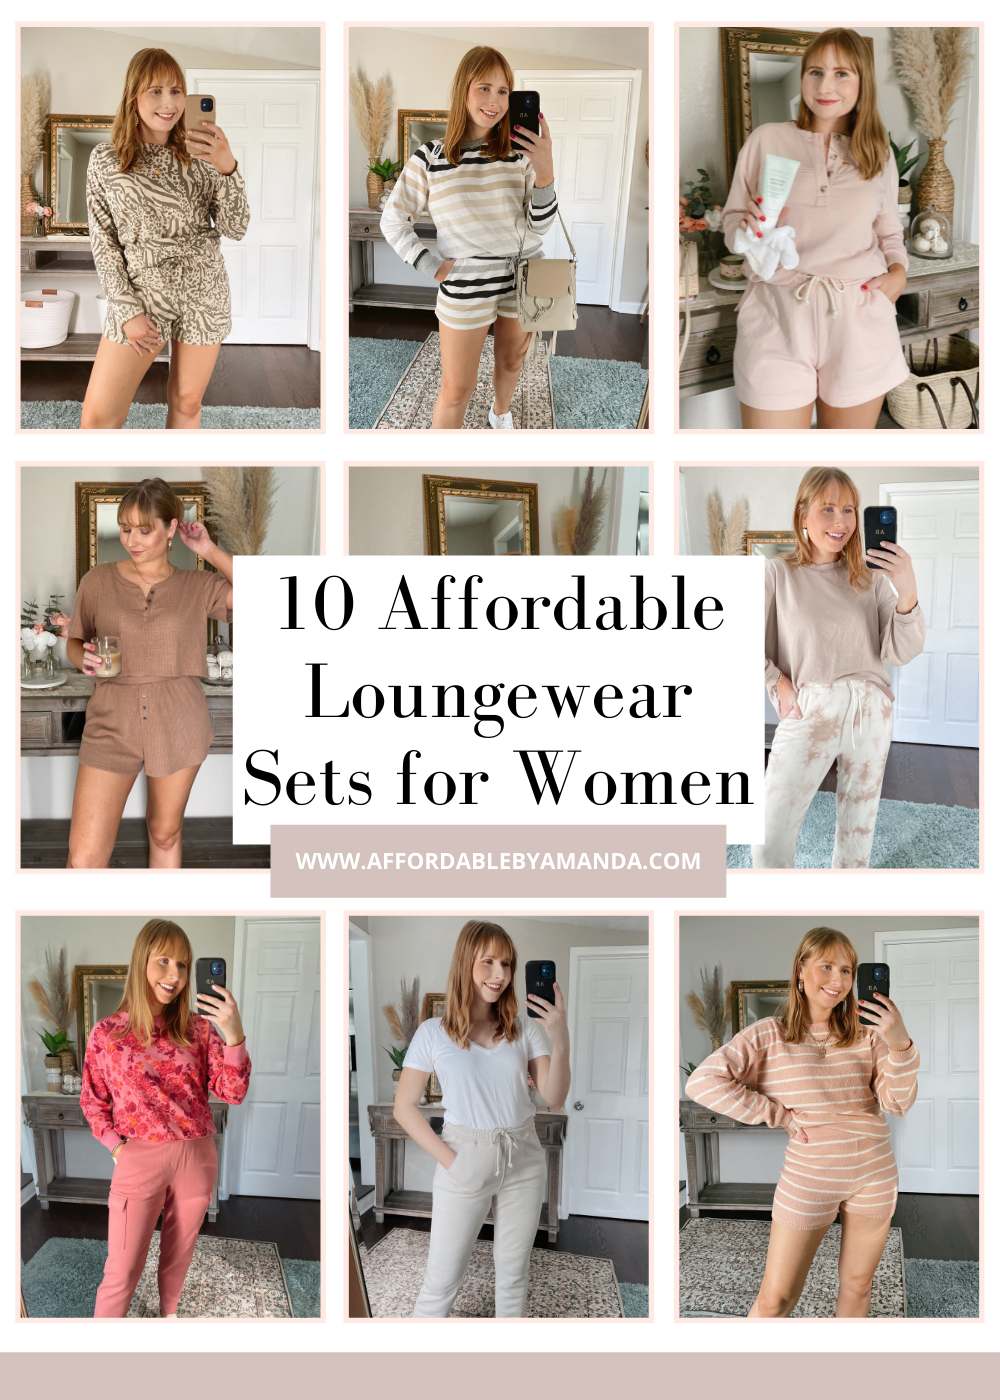 10 Affordable Loungewear Sets for Women - Affordable by Amanda